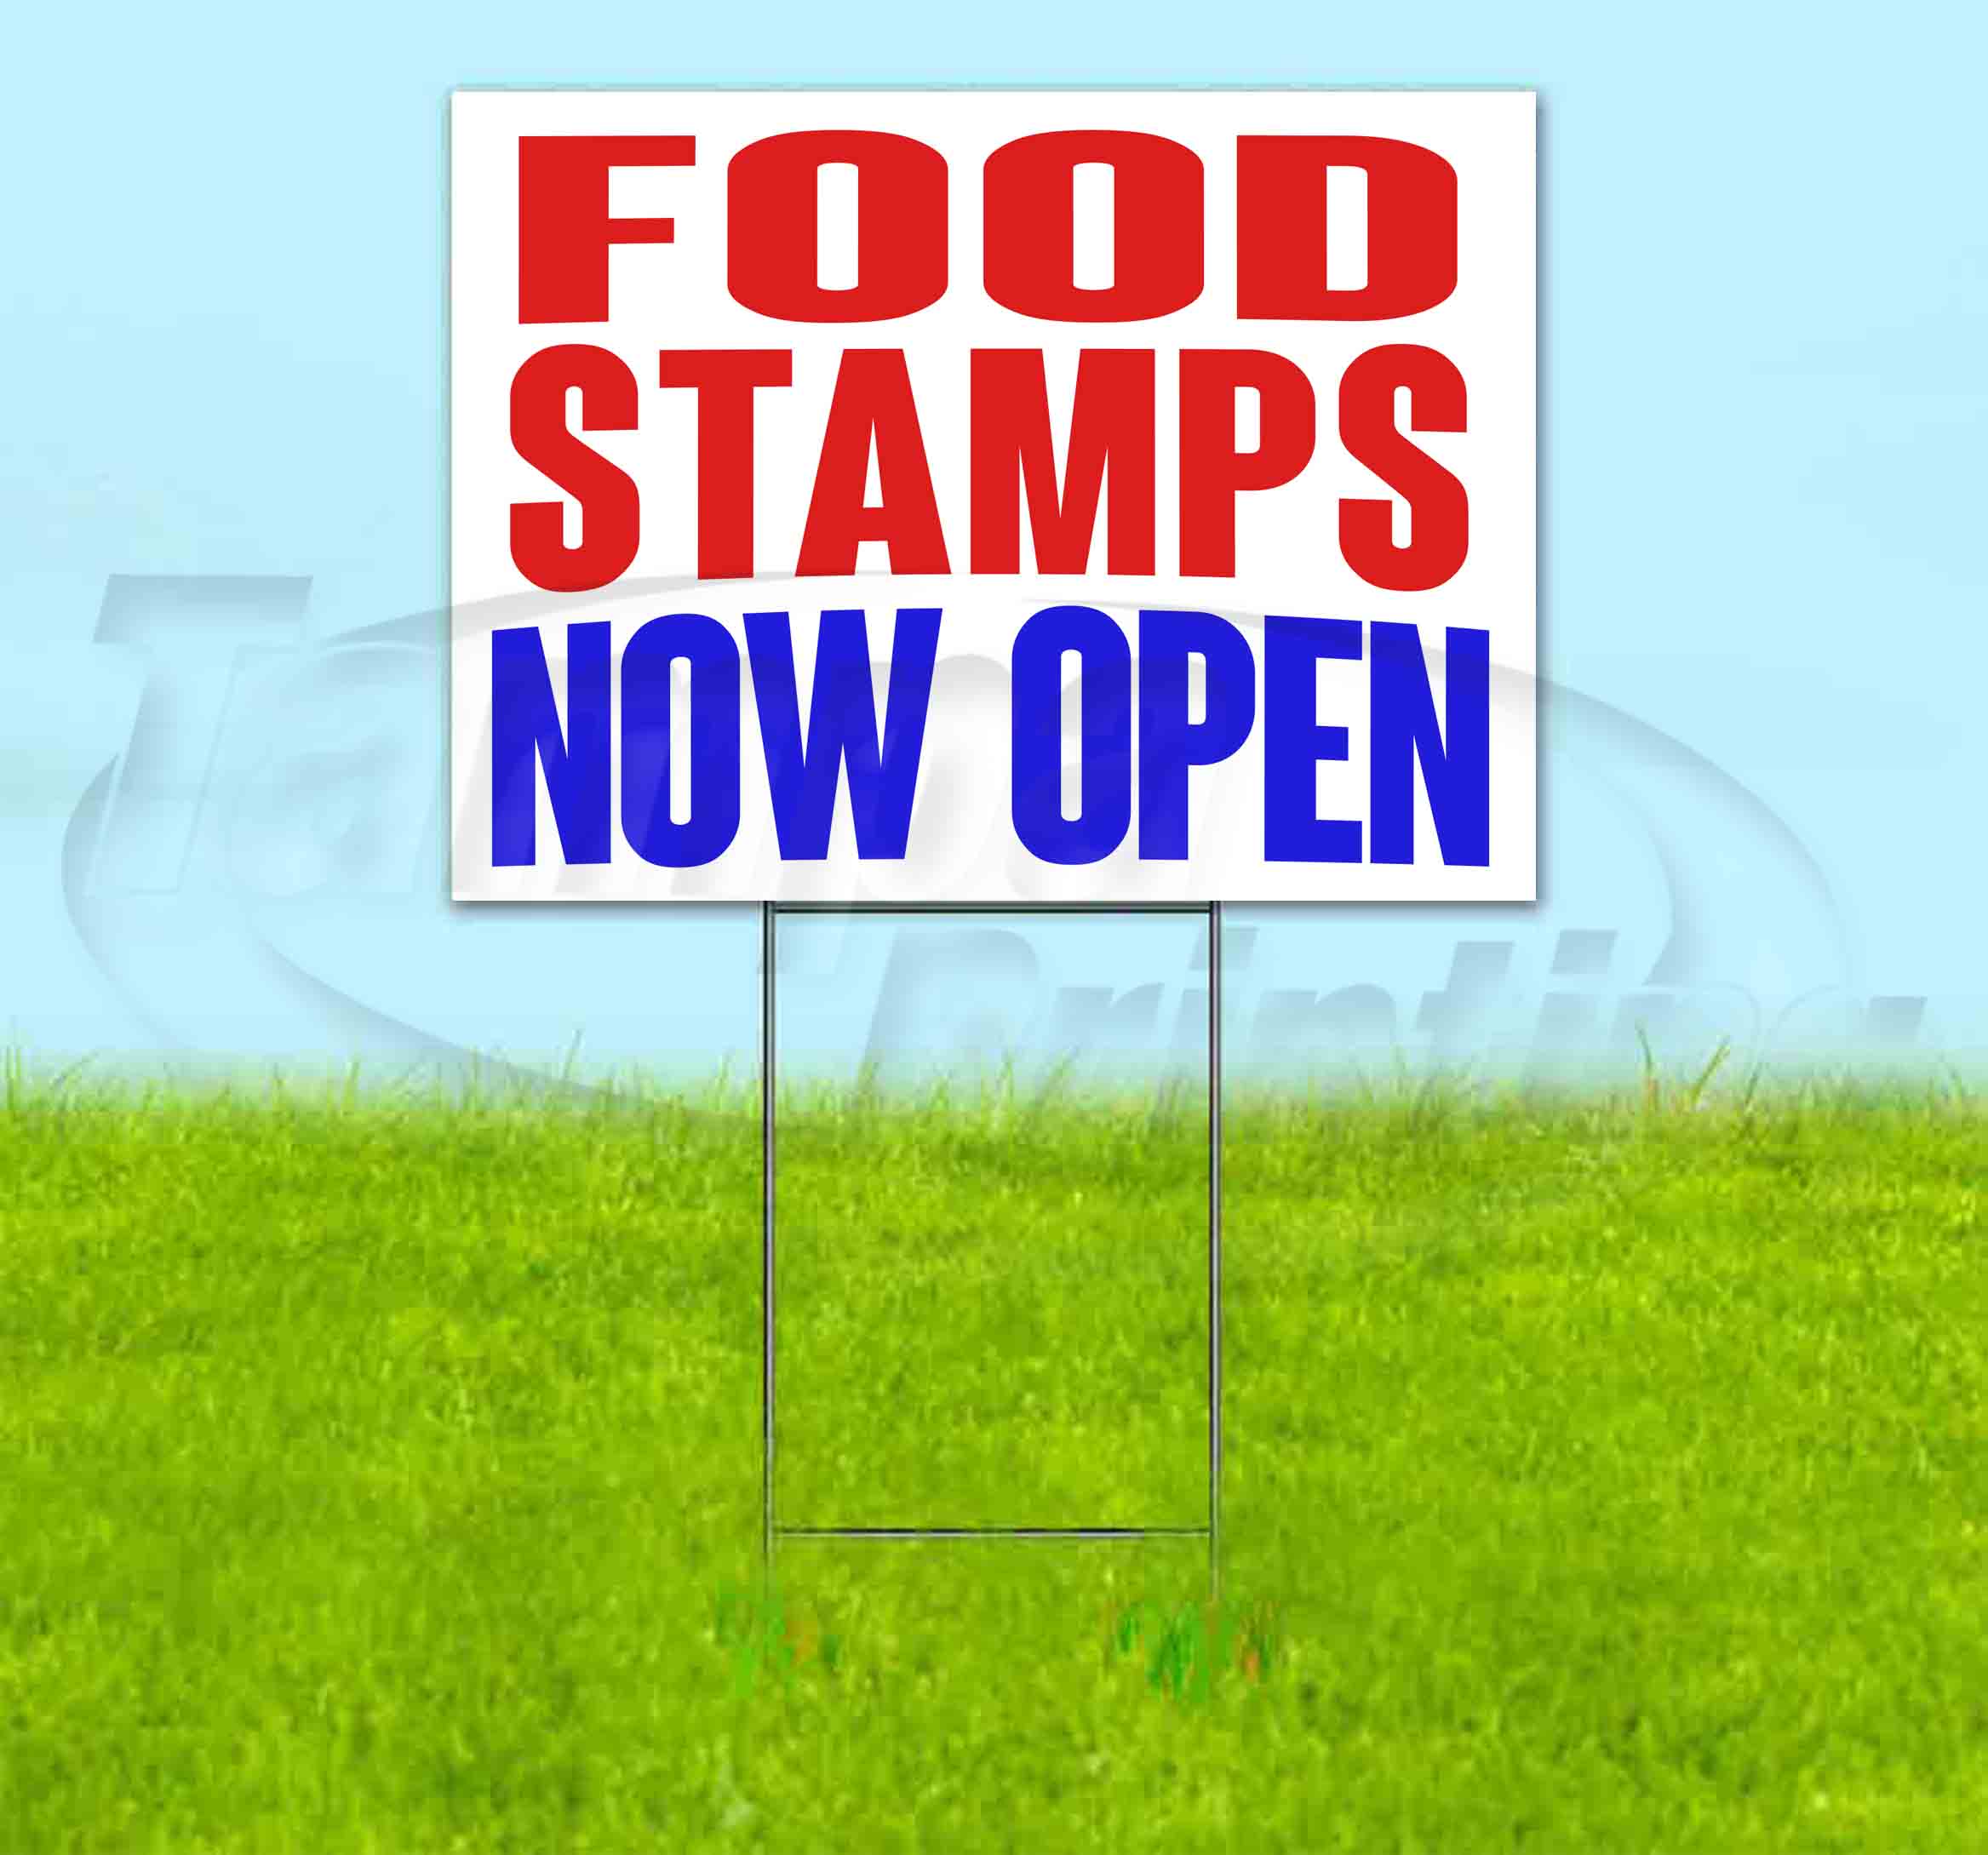 FOOD STAMPS NOW OPEN (18"  X 24" ) CORRUGATED PLASTIC YARD ...